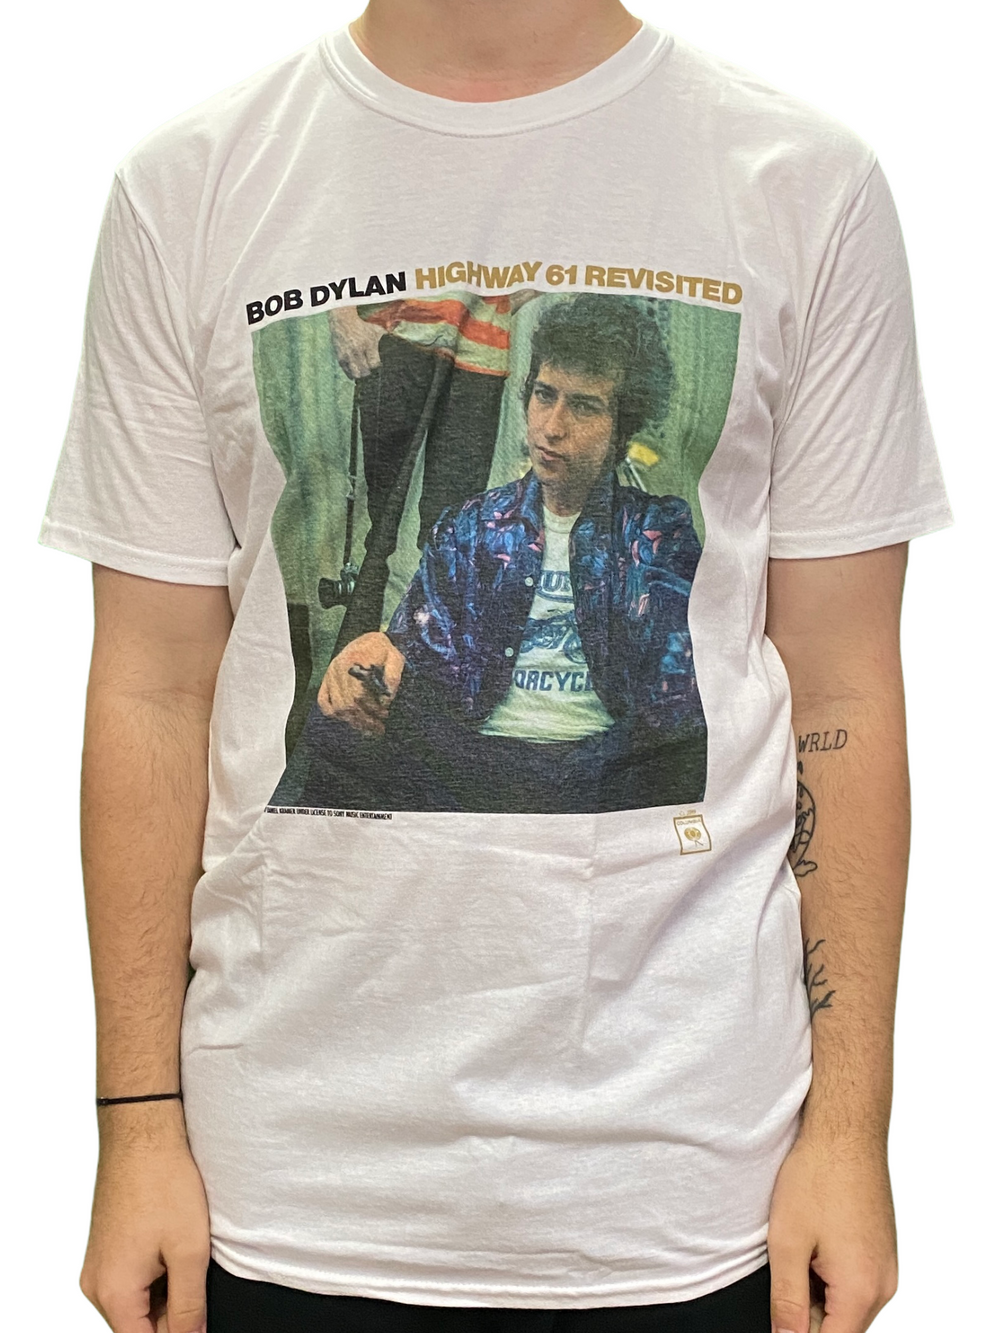 Bob Dylan Highway 61 Revisited Unisex Official T Shirt Brand New Various Sizes